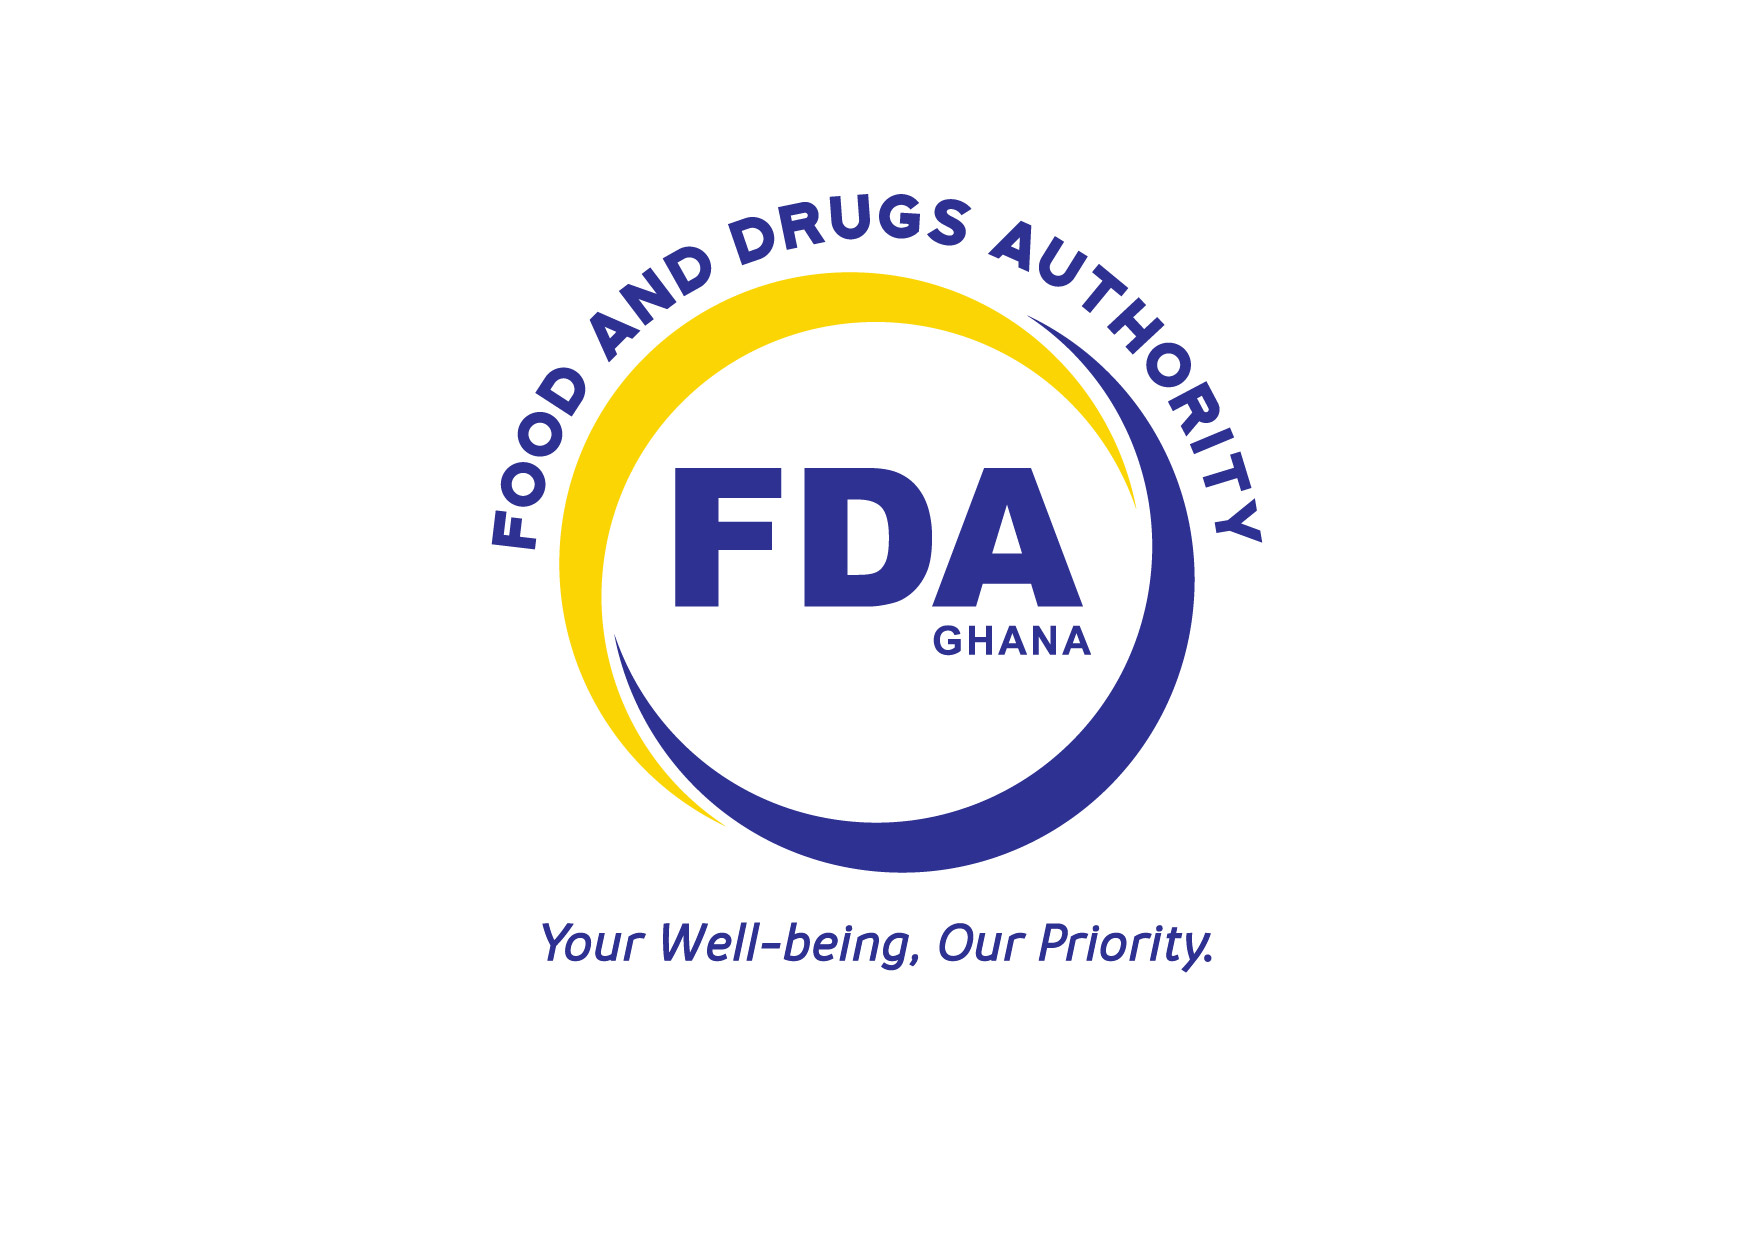 Food and Drugs Authority